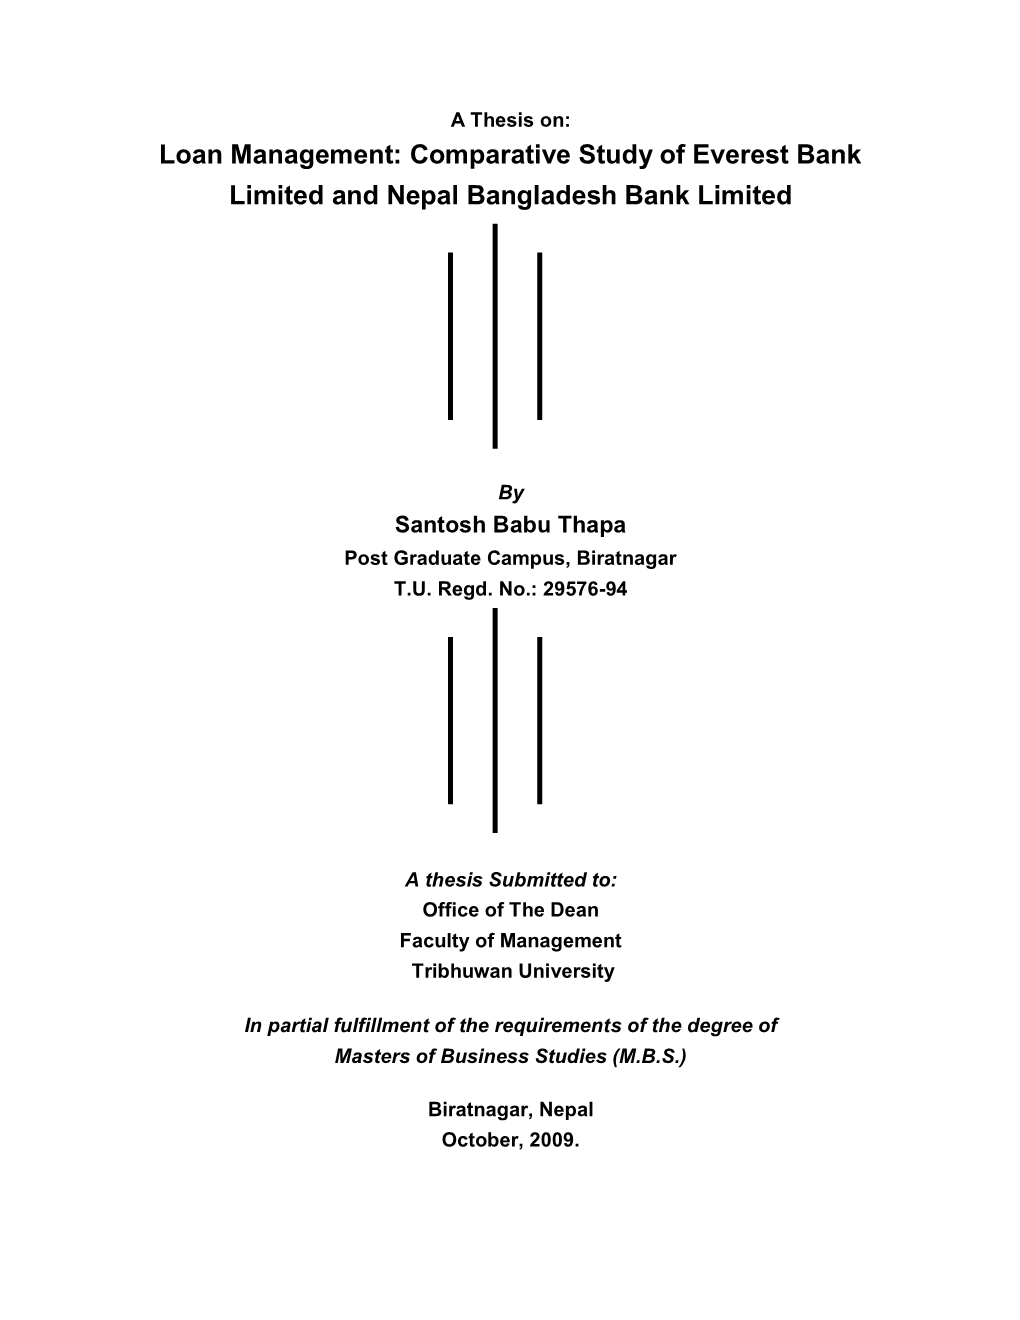 Loan Management: Comparative Study of Everest Bank Limited and Nepal Bangladesh Bank Limited